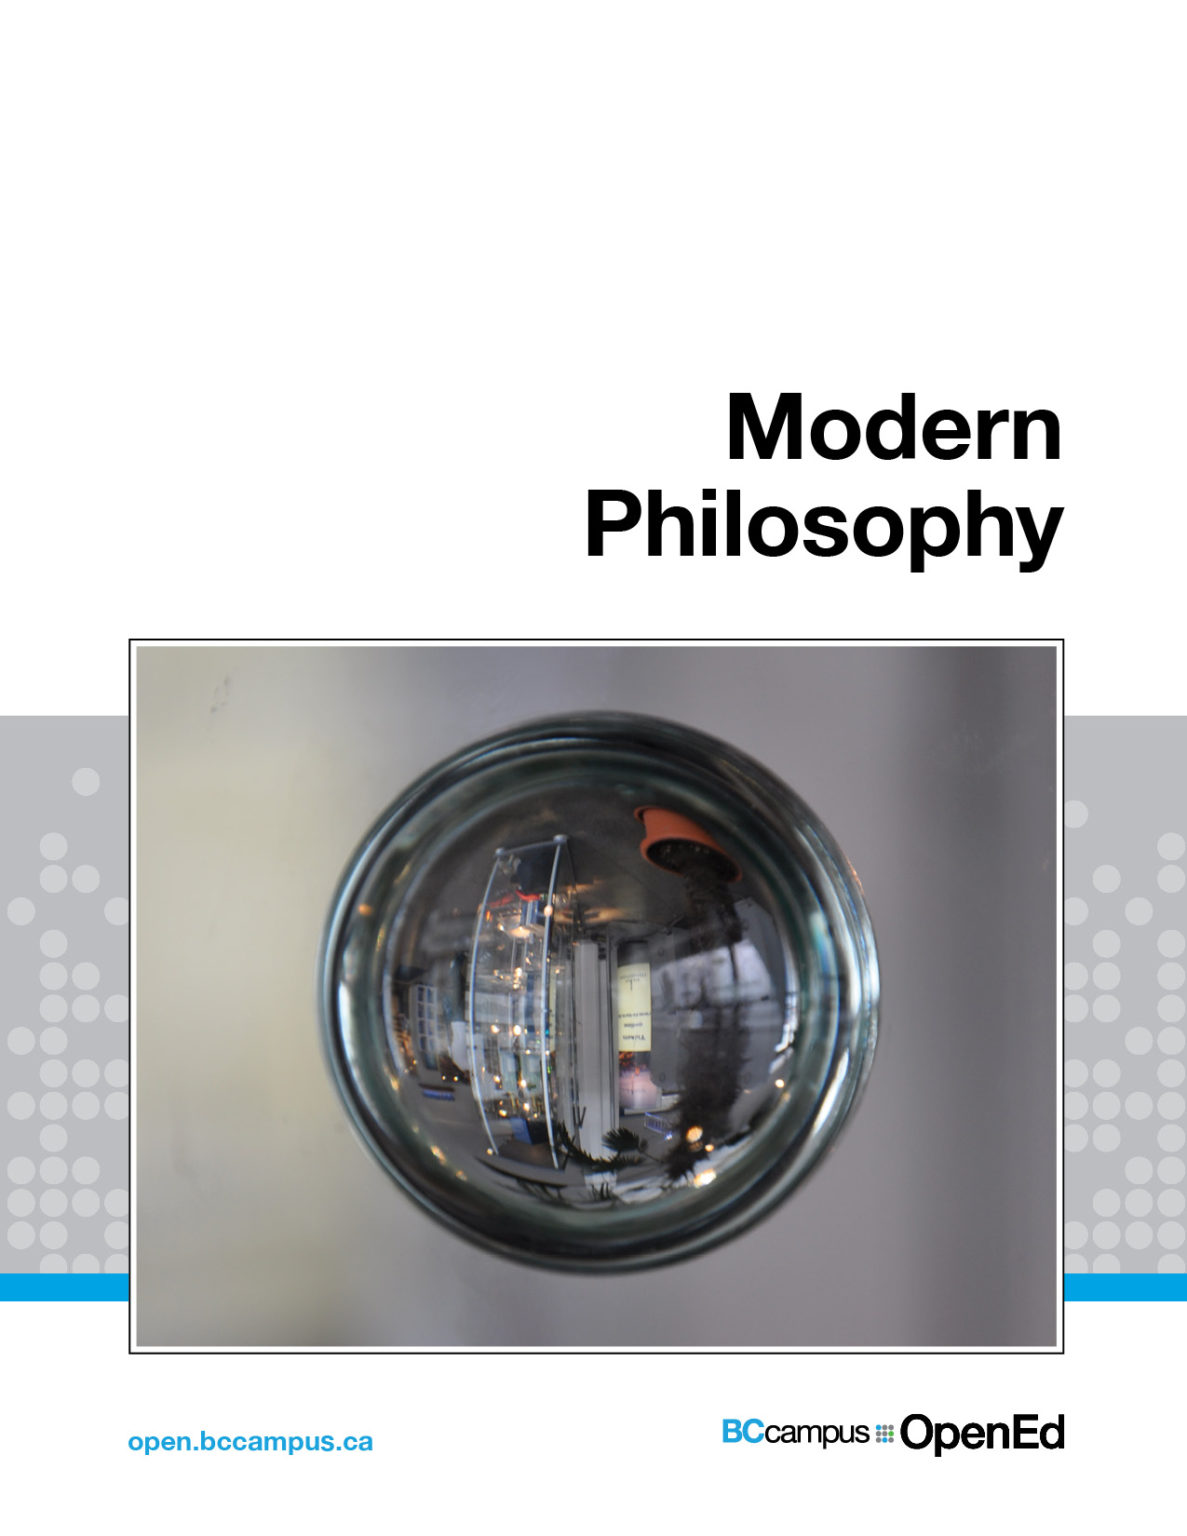 Modern Philosophy The Open Textbook Project provides flexible and